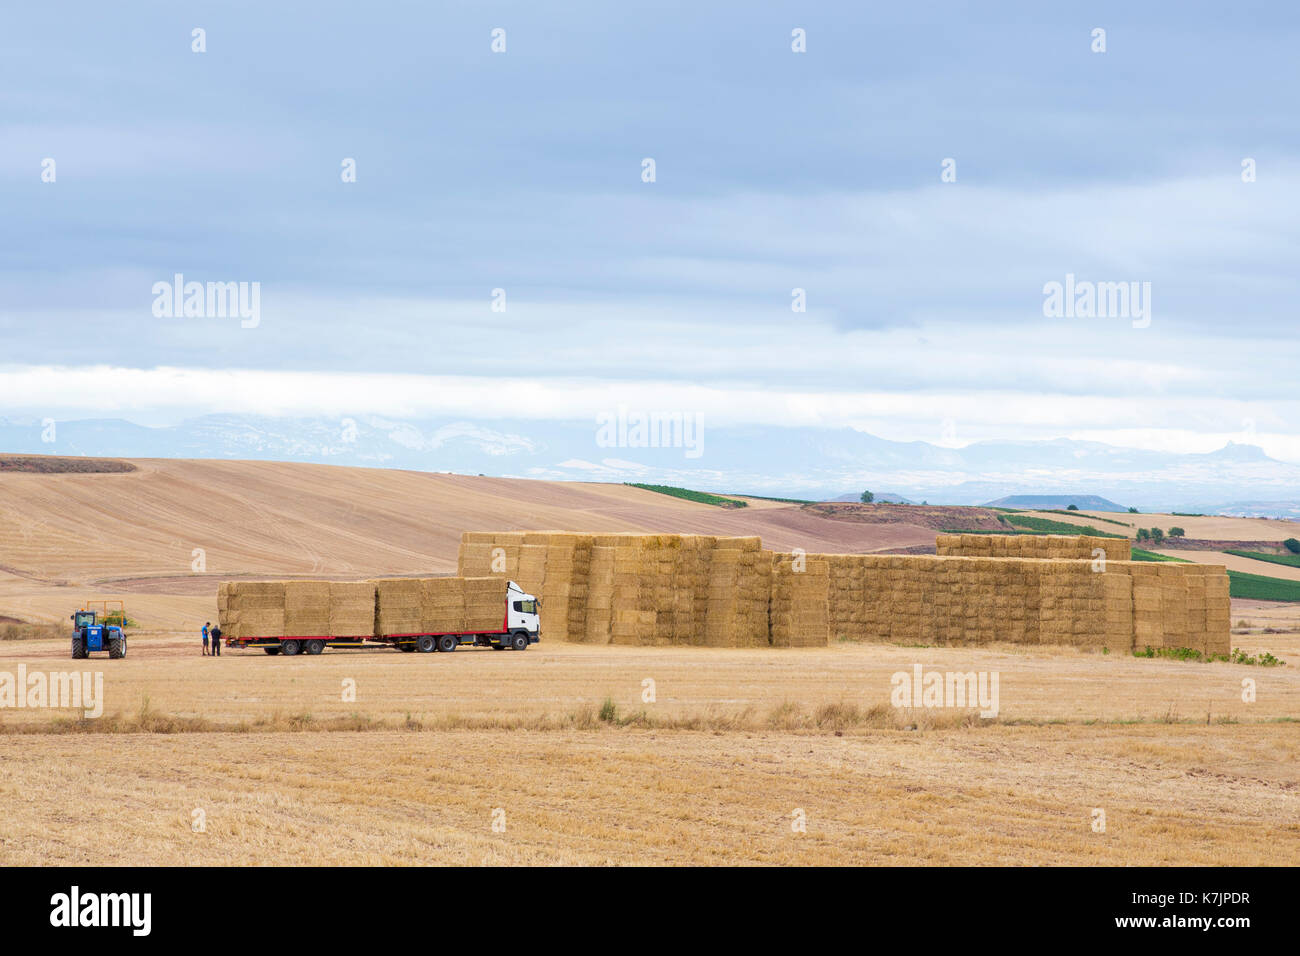 Farming scene of straw bales gathered on agricultural trailer after wheat crop in the plains of La Rioja, Spain Stock Photo